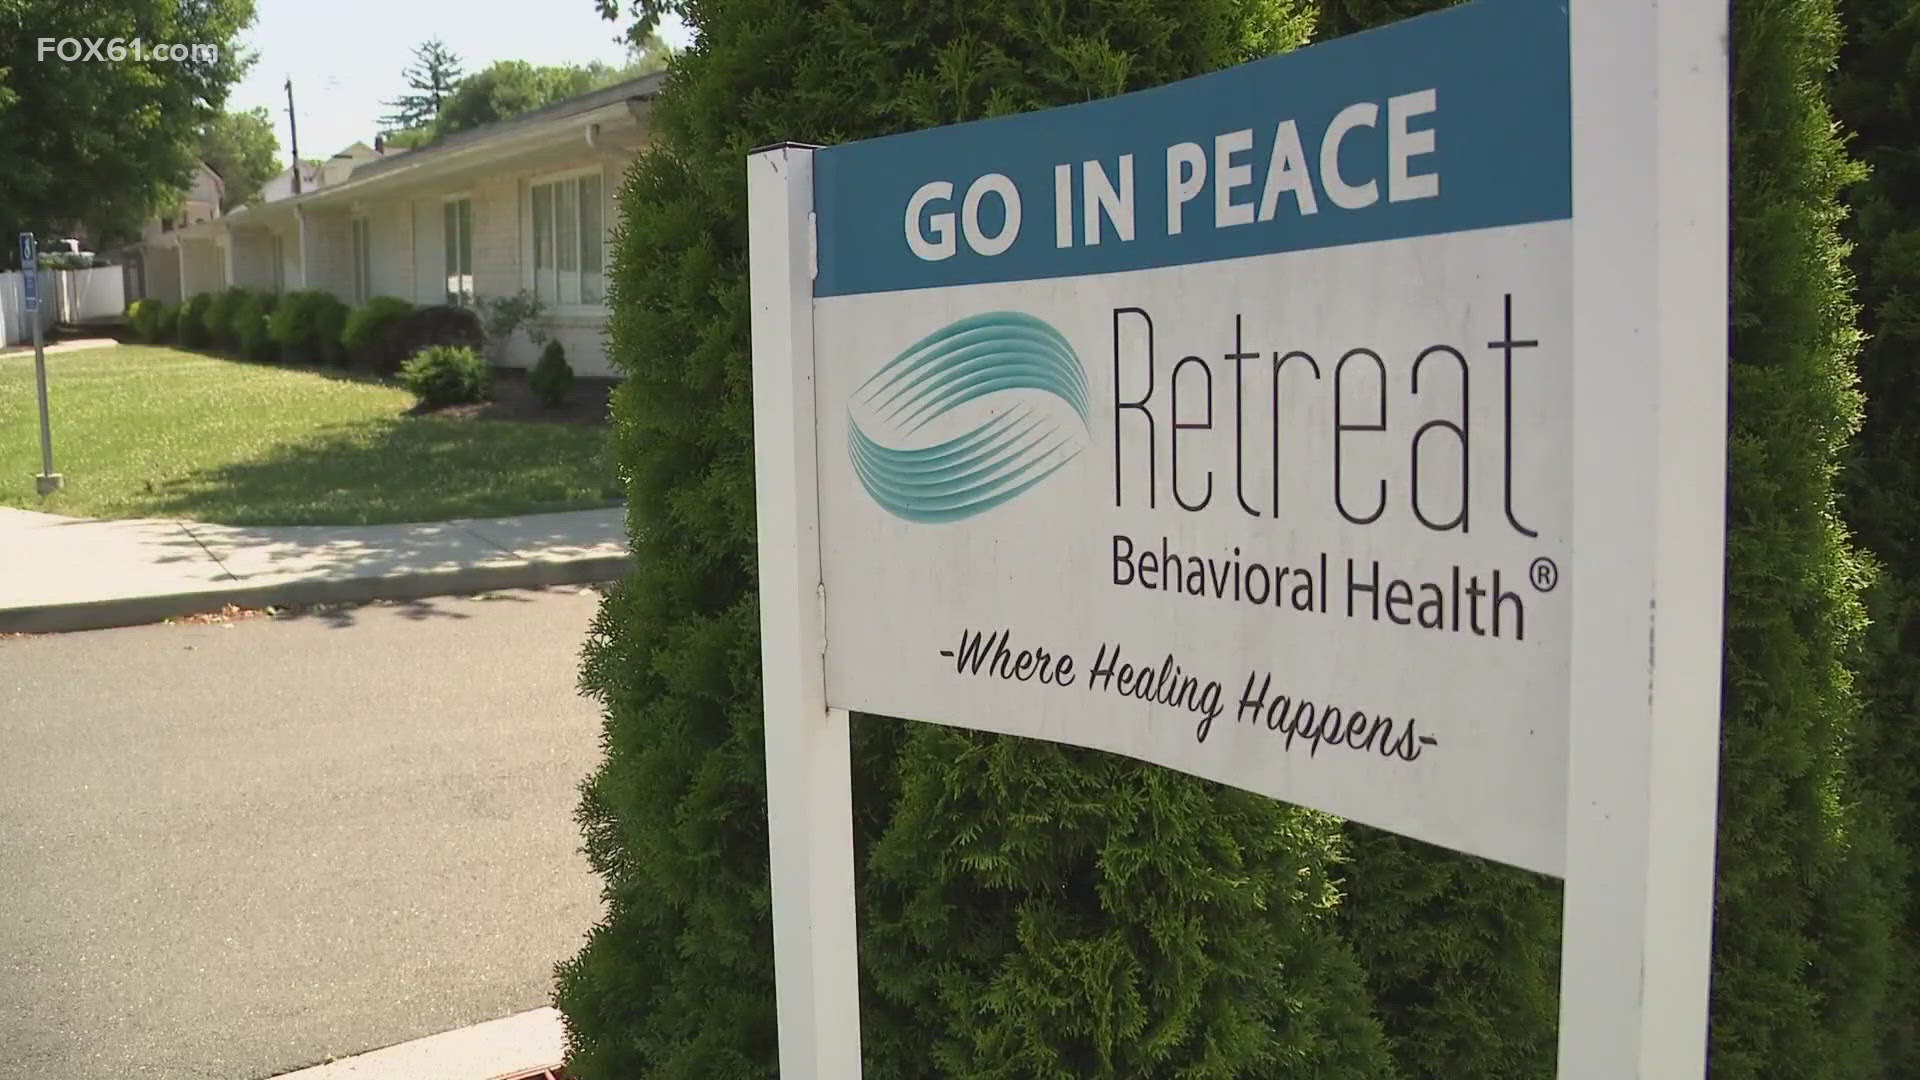 Following the death of their founder and CEO, Retreat Behavioral Health has closed both its patient and outpatient facilities in New Haven.